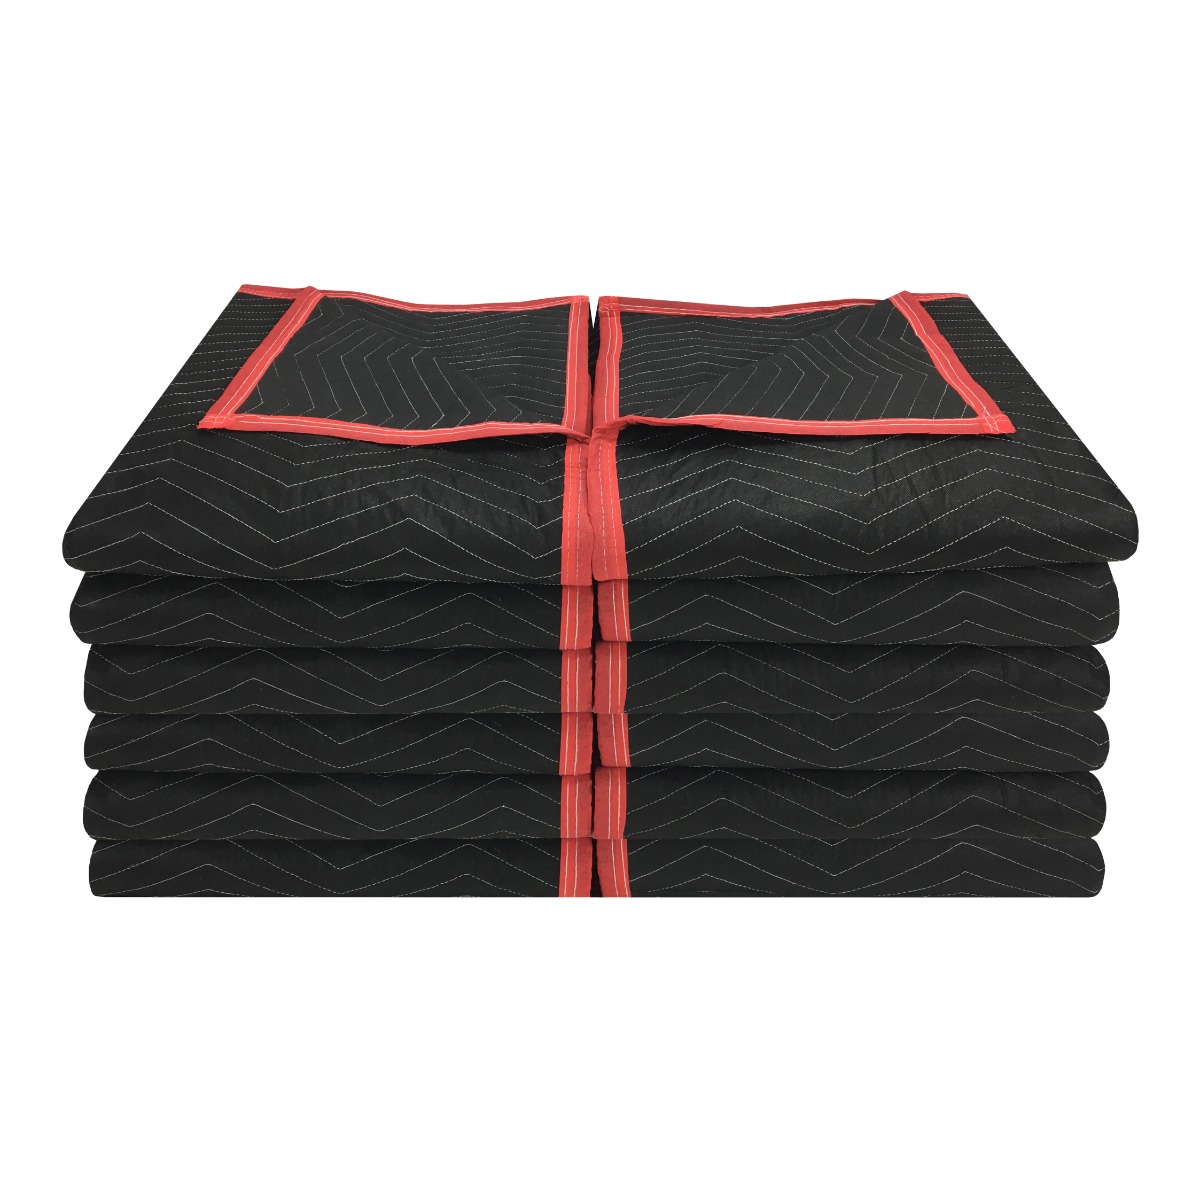 UBMOVE 12 Pack of Deluxe Moving Blankets - 5.42lbs/each - Protective Shipping